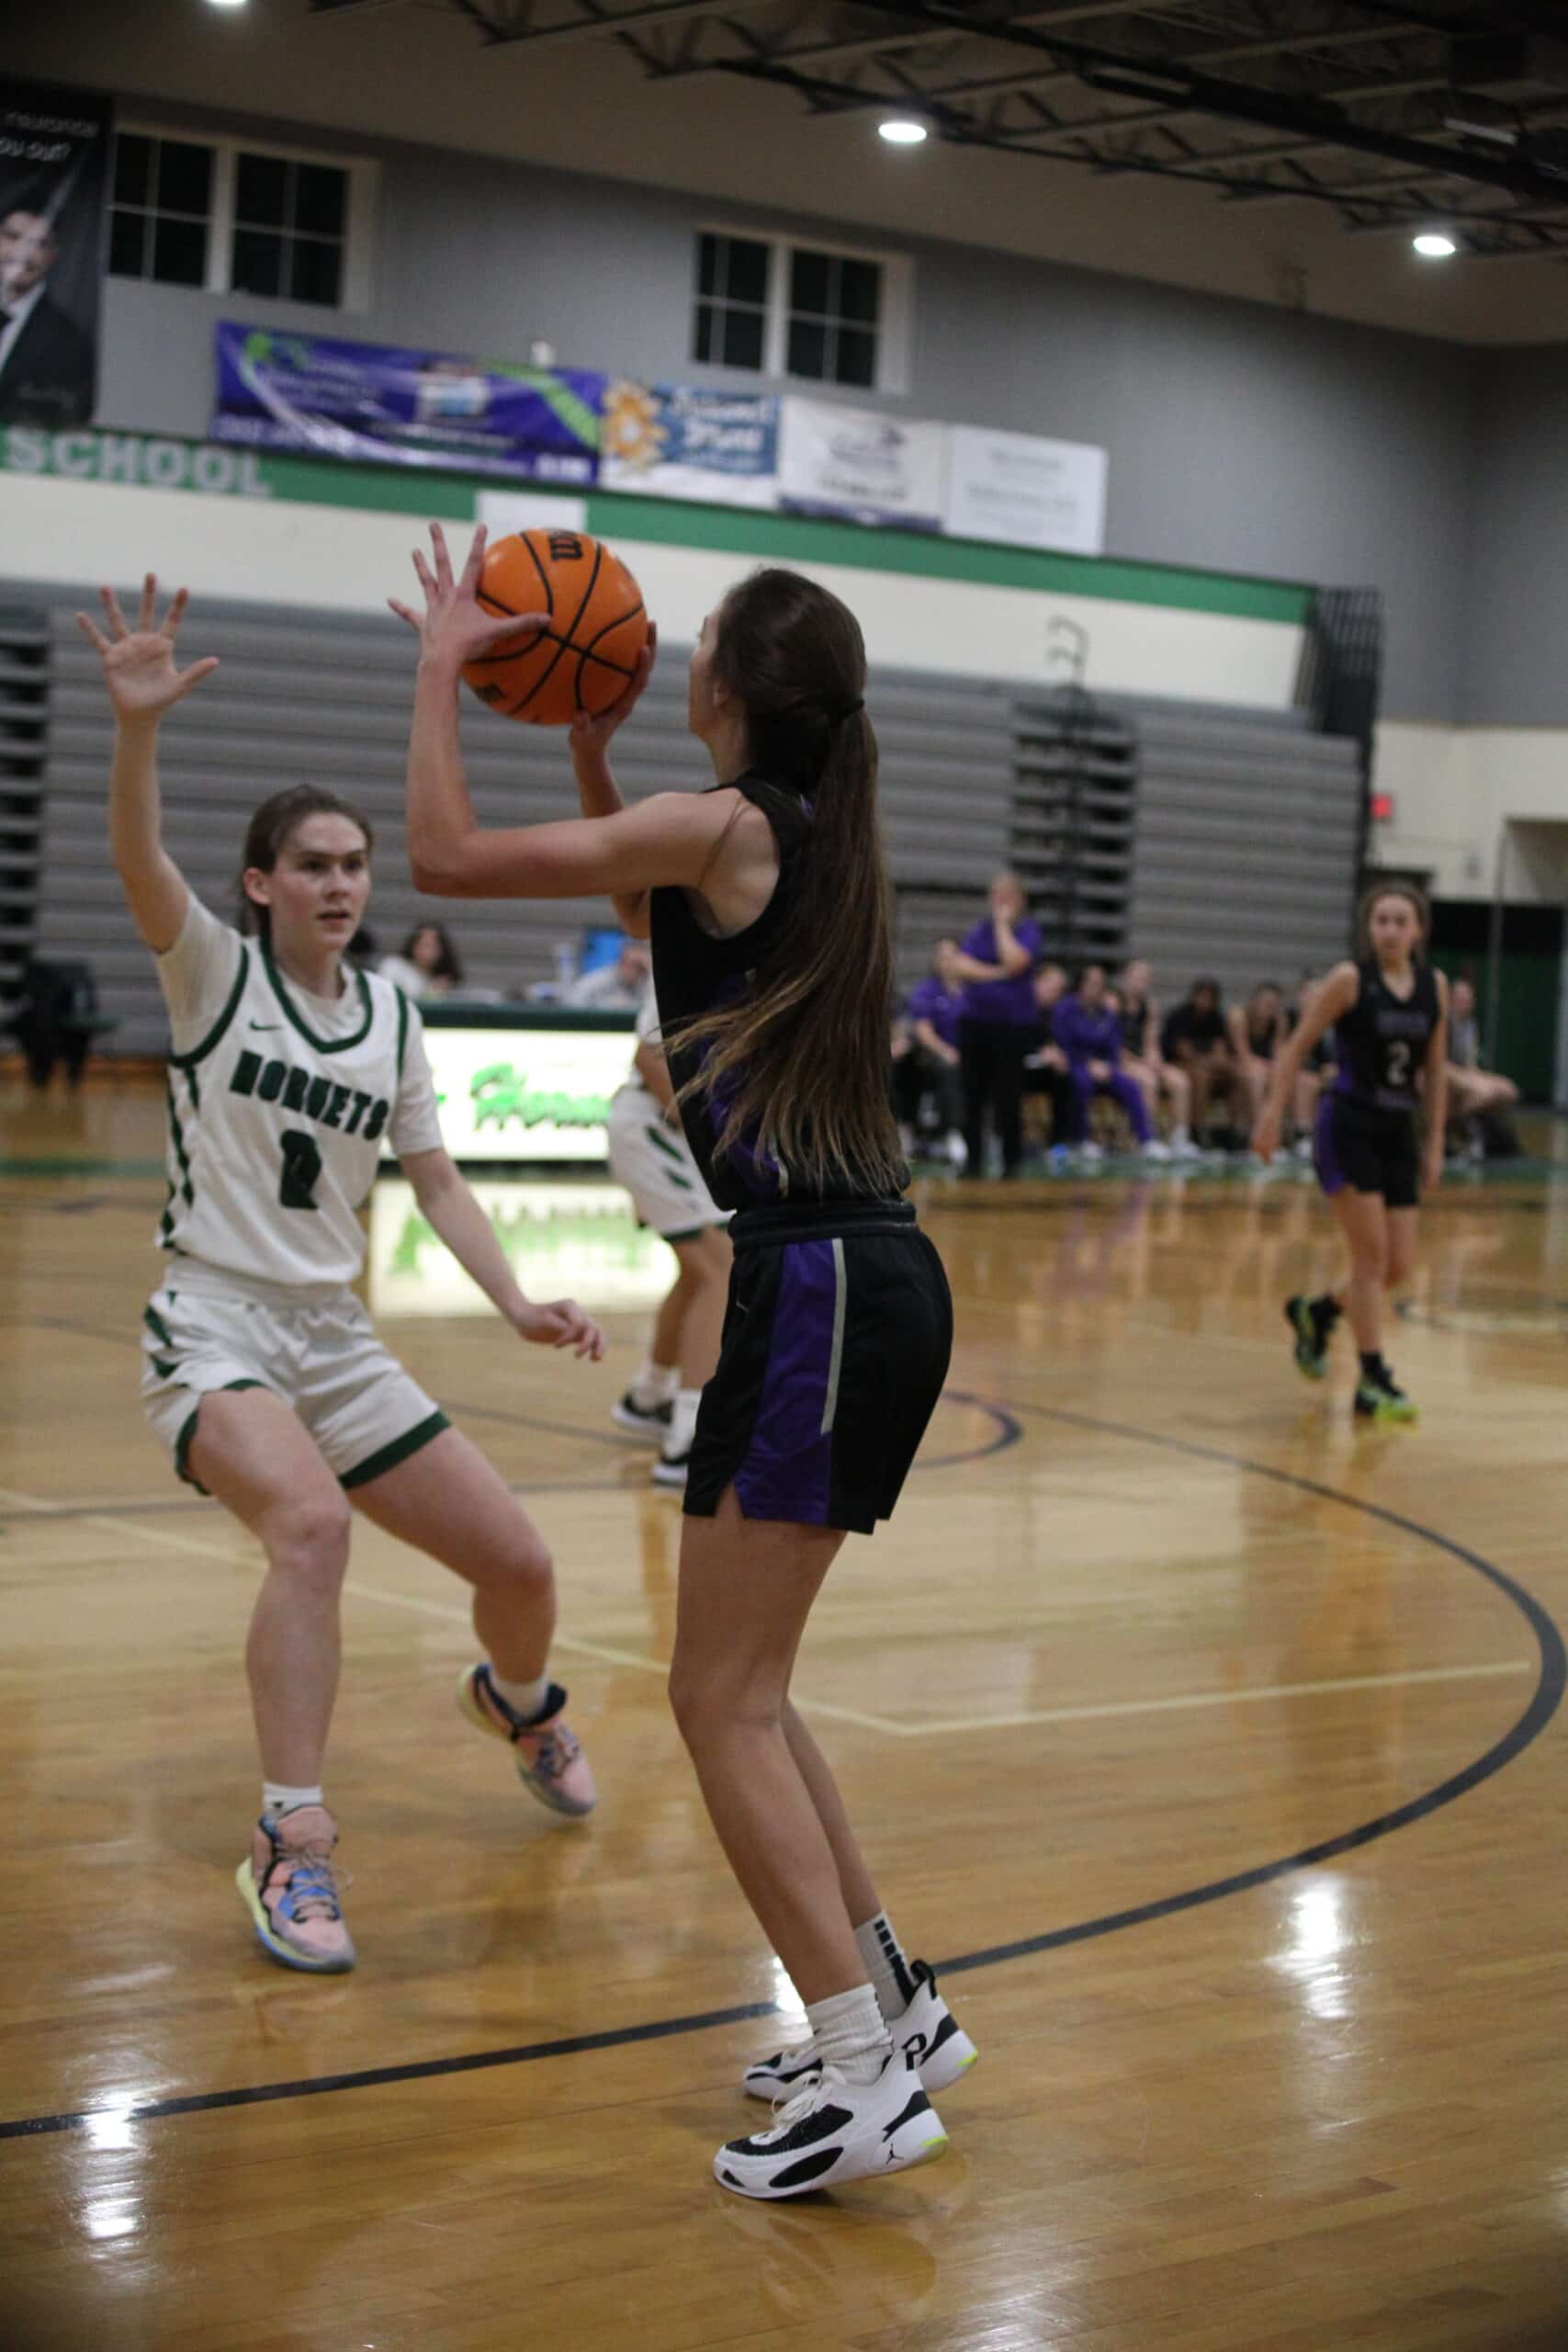 Hornet Reese Halter (So.) No. 0 attempts to defend against the shot from River Ridge. Jan. 4, 2023 Photo by Hanna Fox.